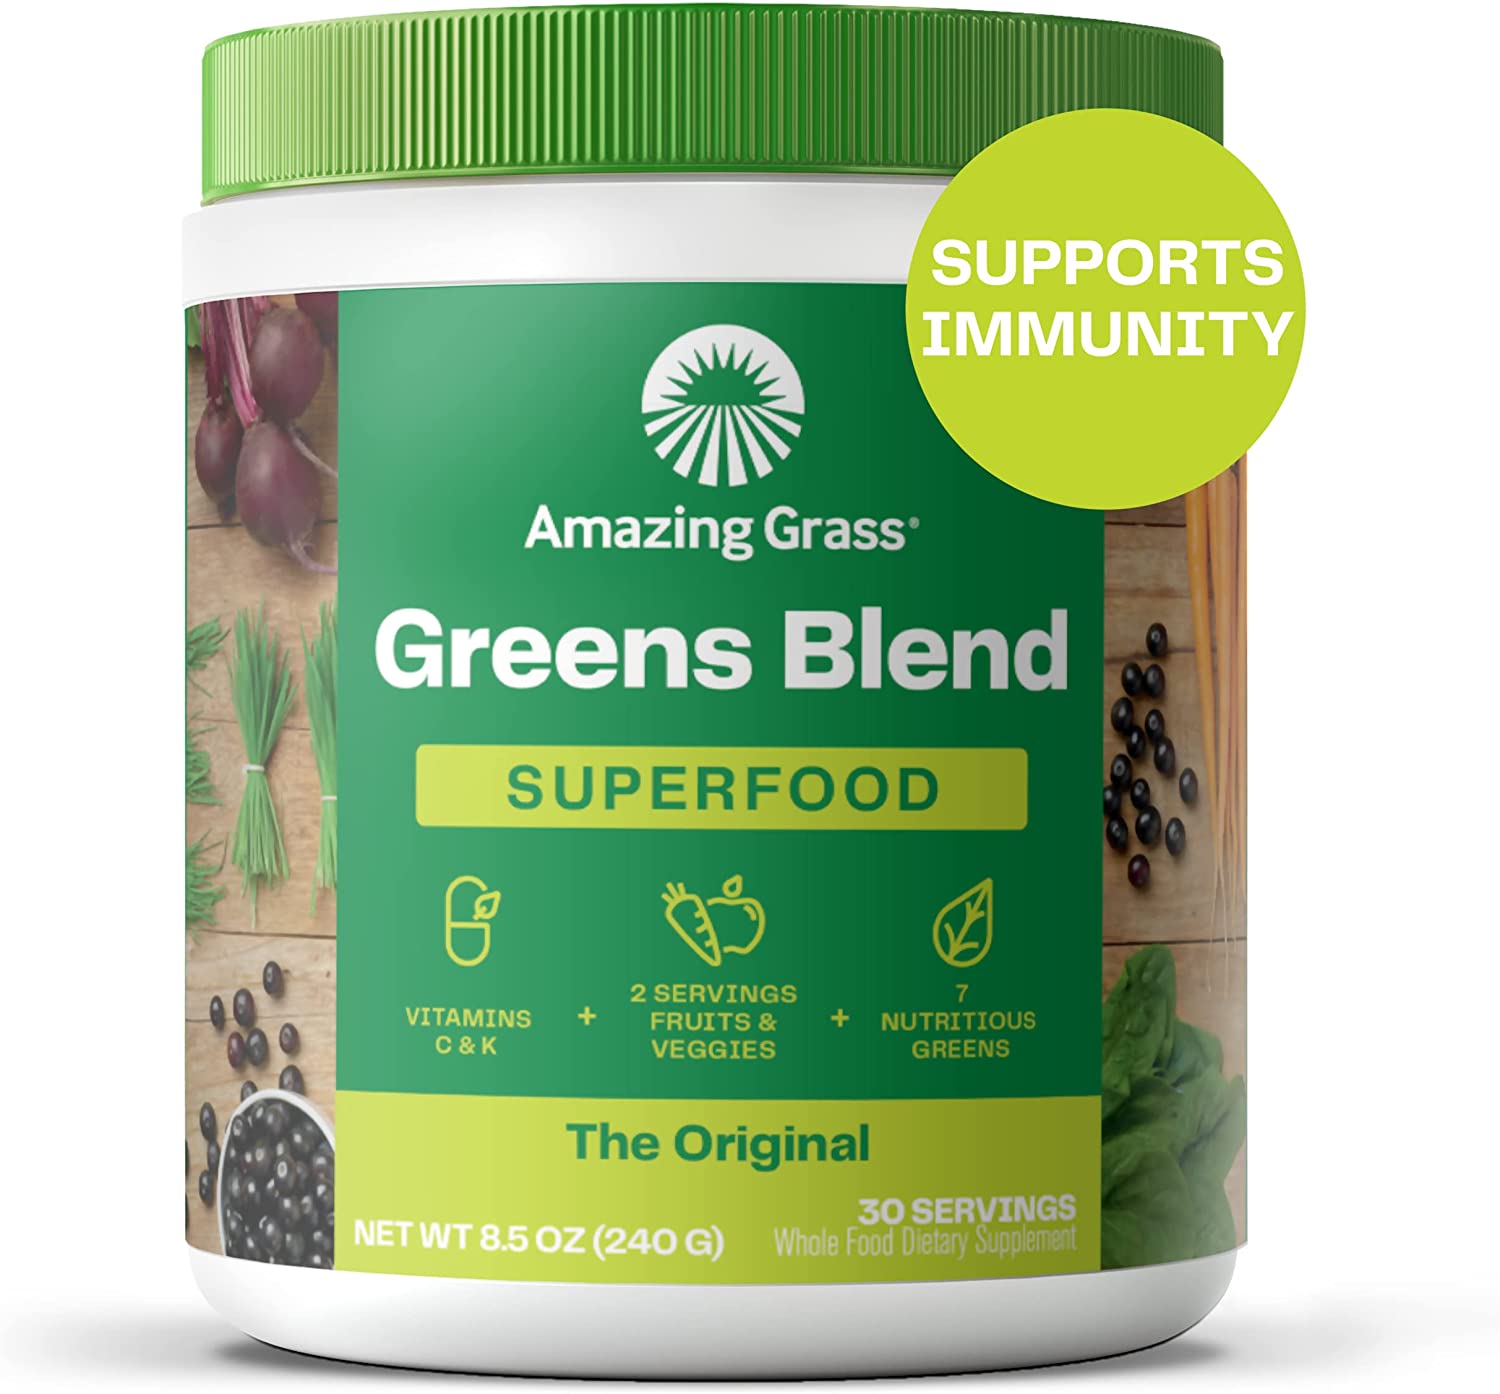 Amazing Grass Greens Blend Superfood — The Best Mixed Green Powered
